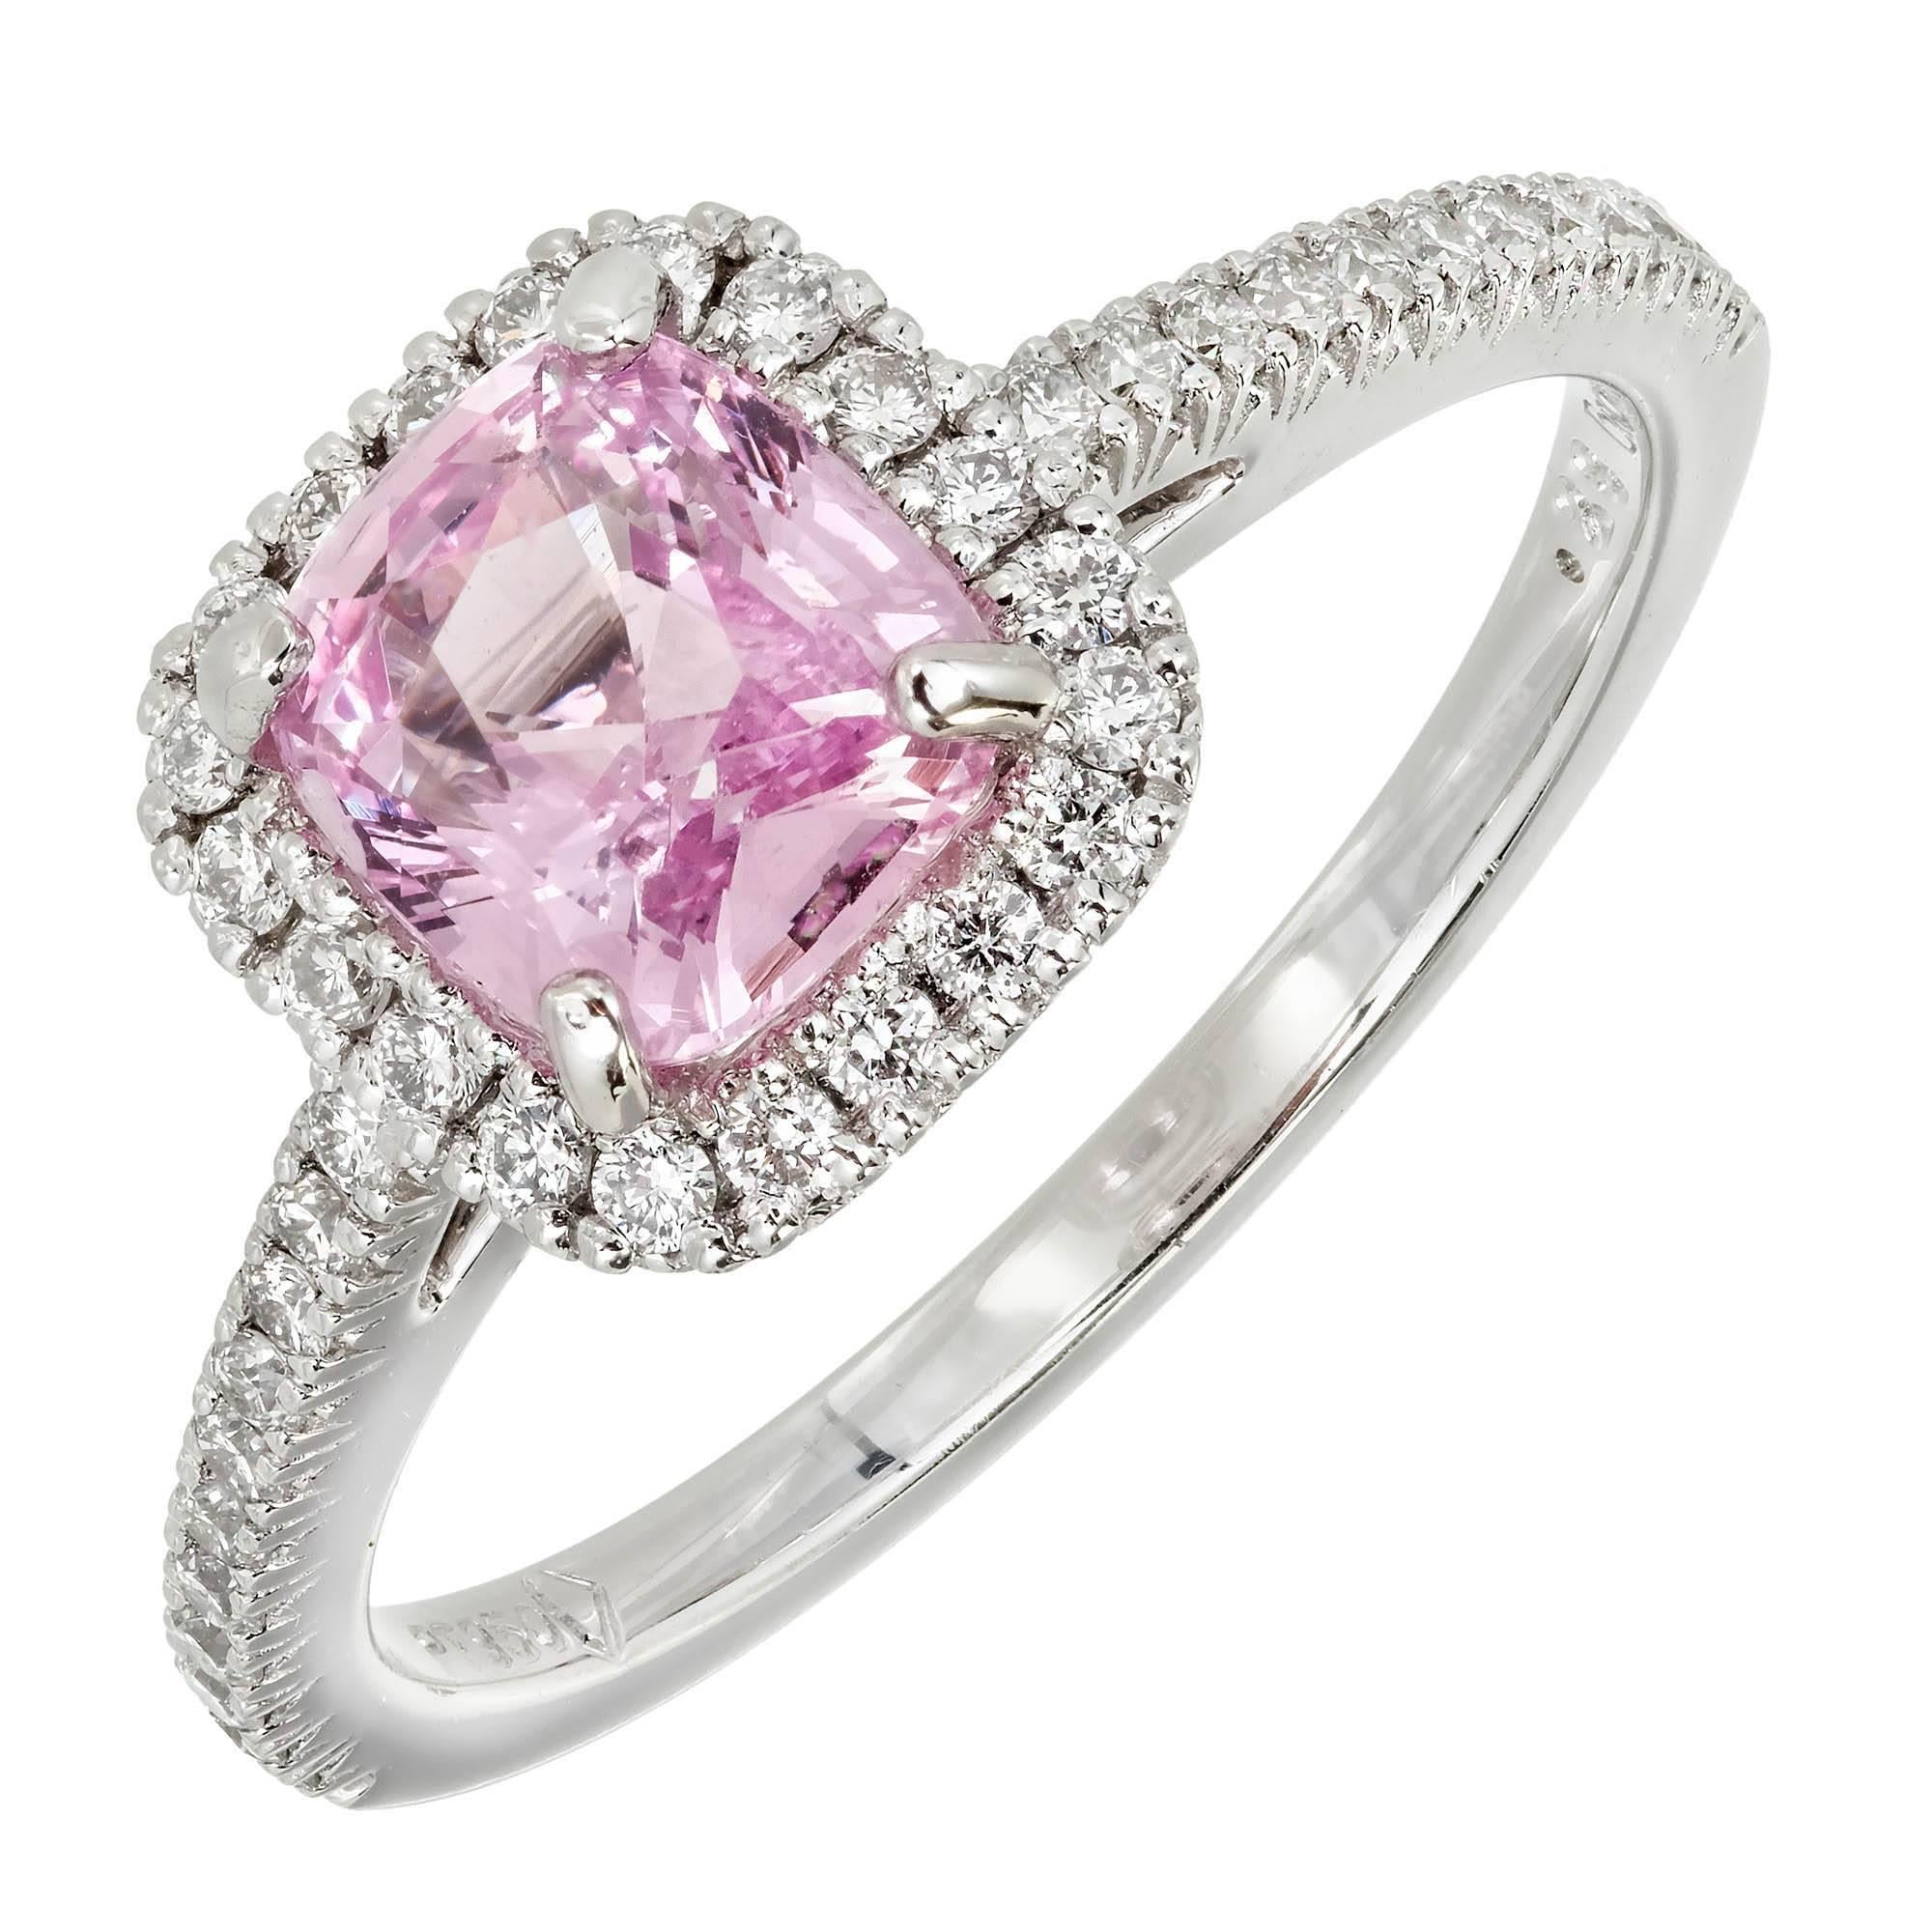 Cushion cut bright sparkly cushion cut pink sapphire and diamond halo platinum engagement ring. GIA certified natural Sapphire.

1 cushion pink natural Sapphire, no enhancements, approx. total weight 1.54cts, GIA certificate #6183476385 
42 full cut